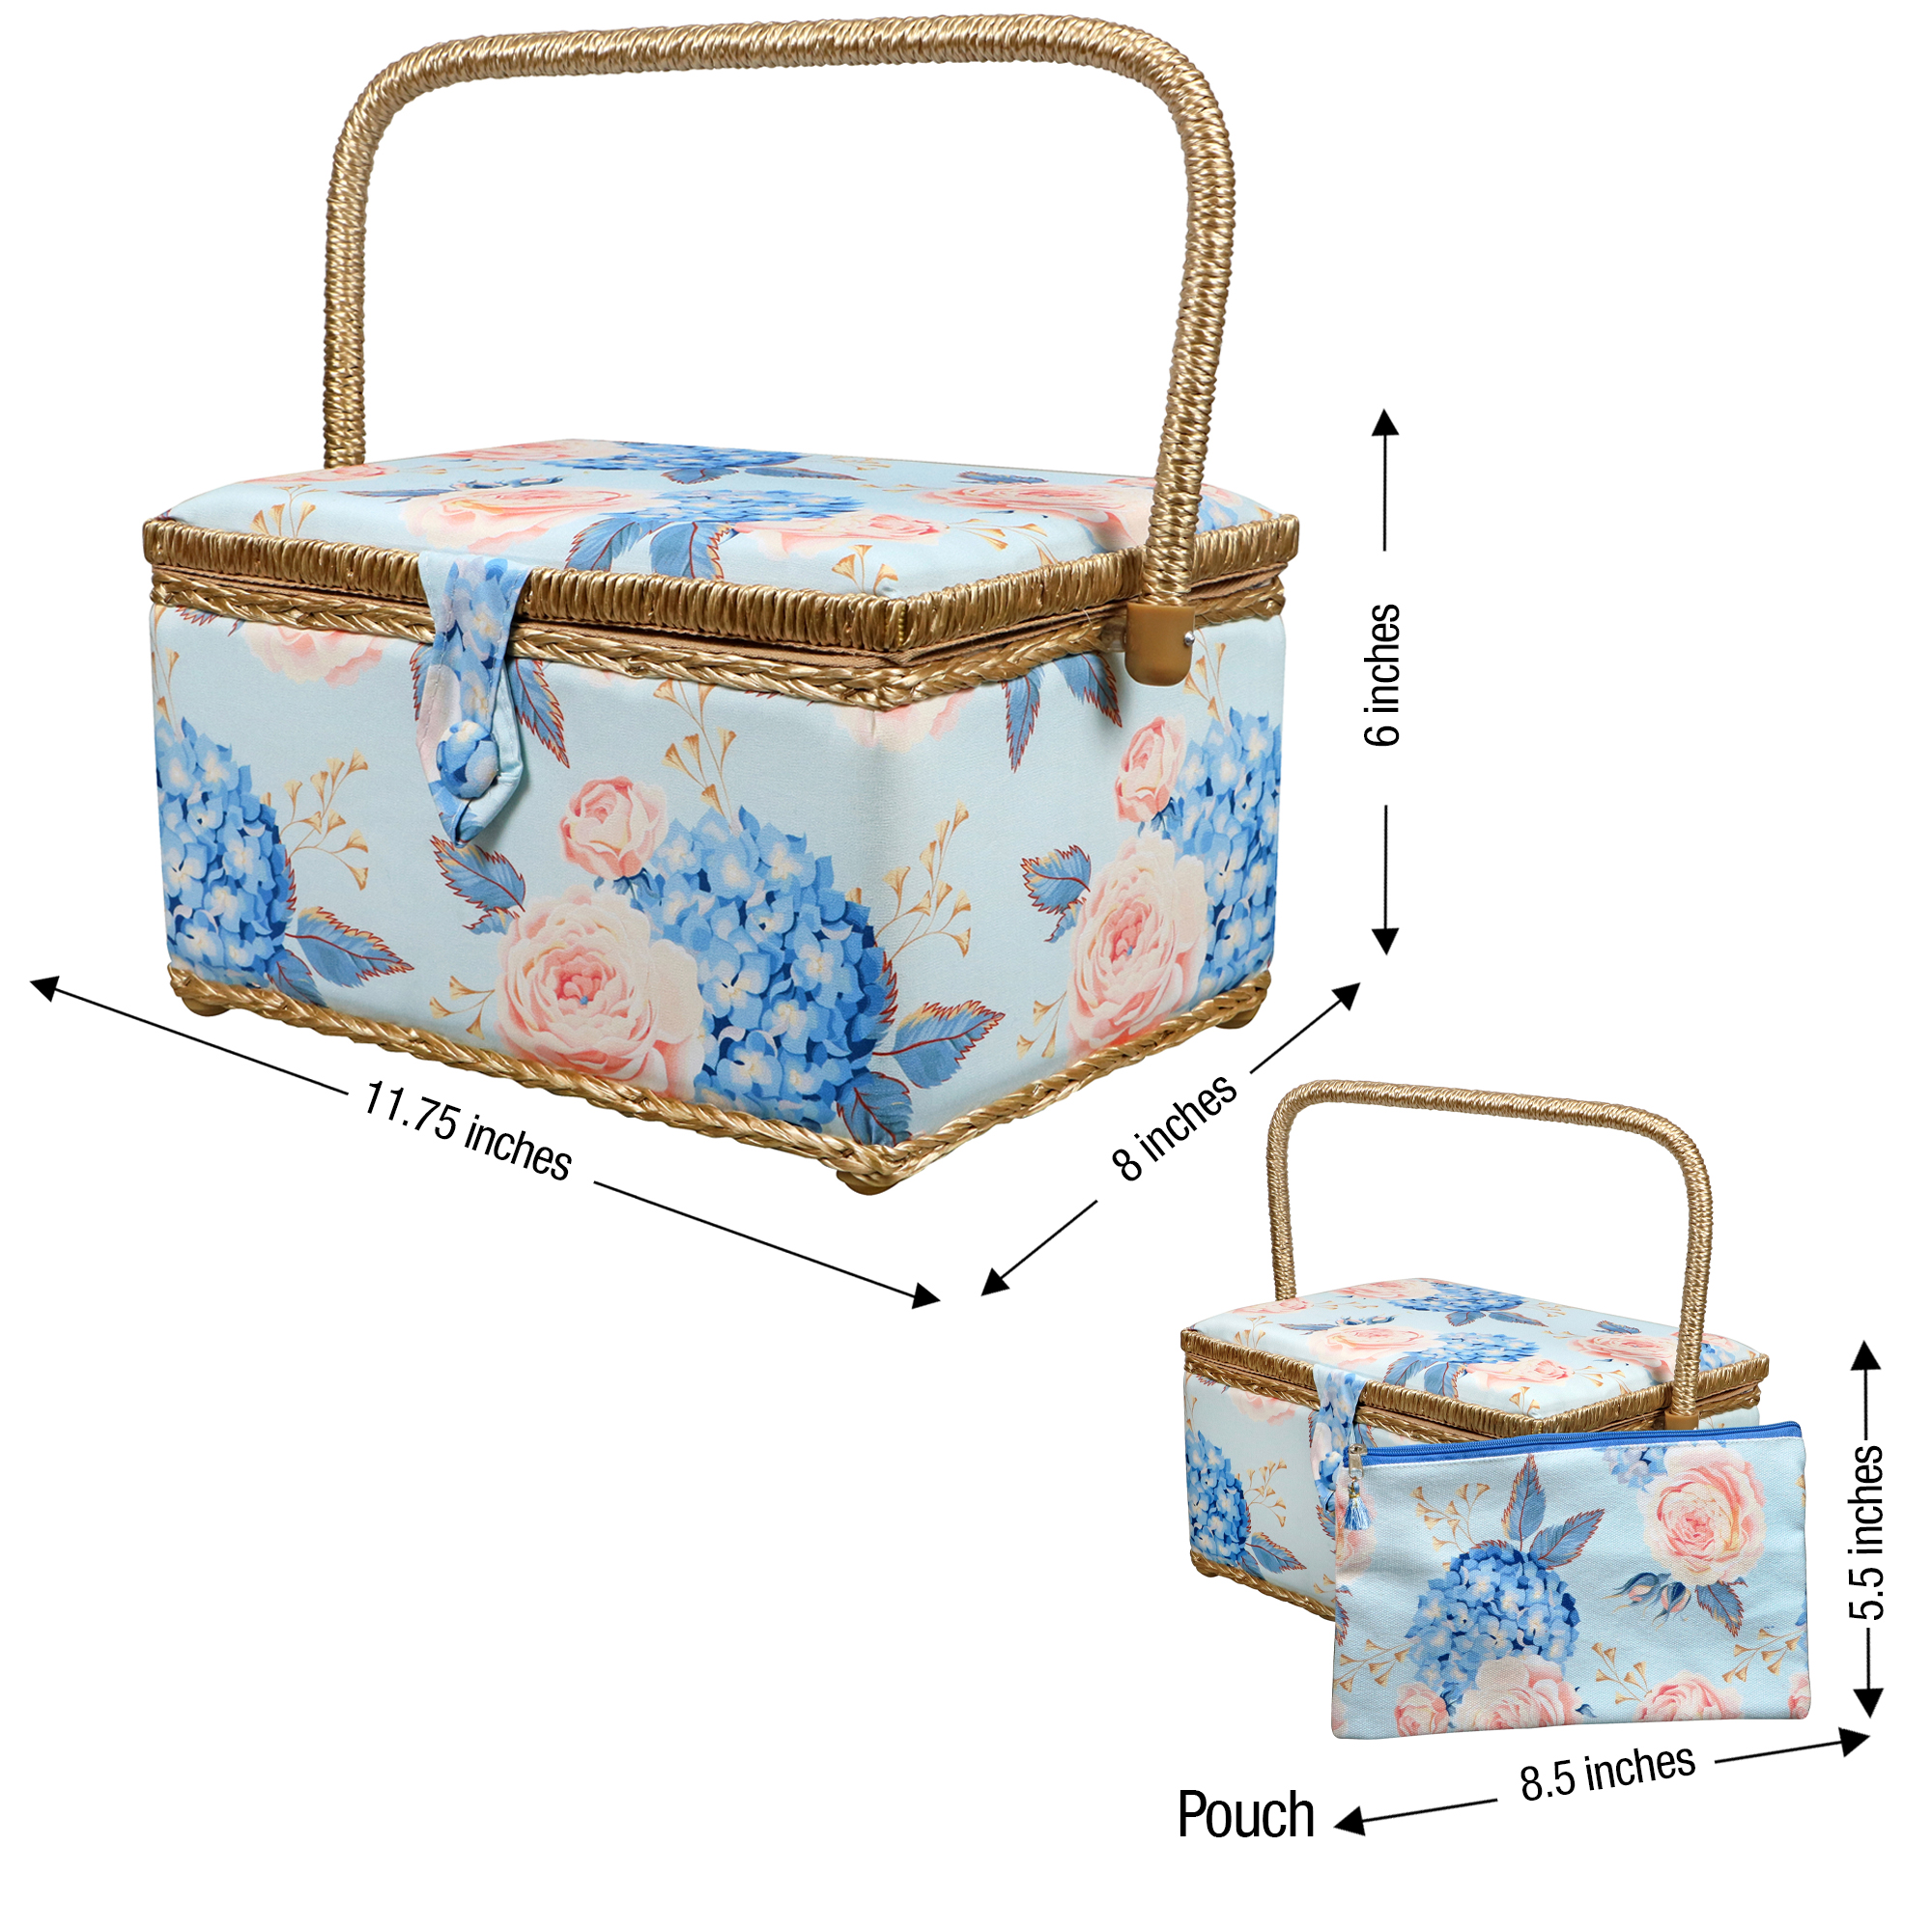 Singer L Sewing Basket Hydrangeas Print with Matching Zipper Pouch